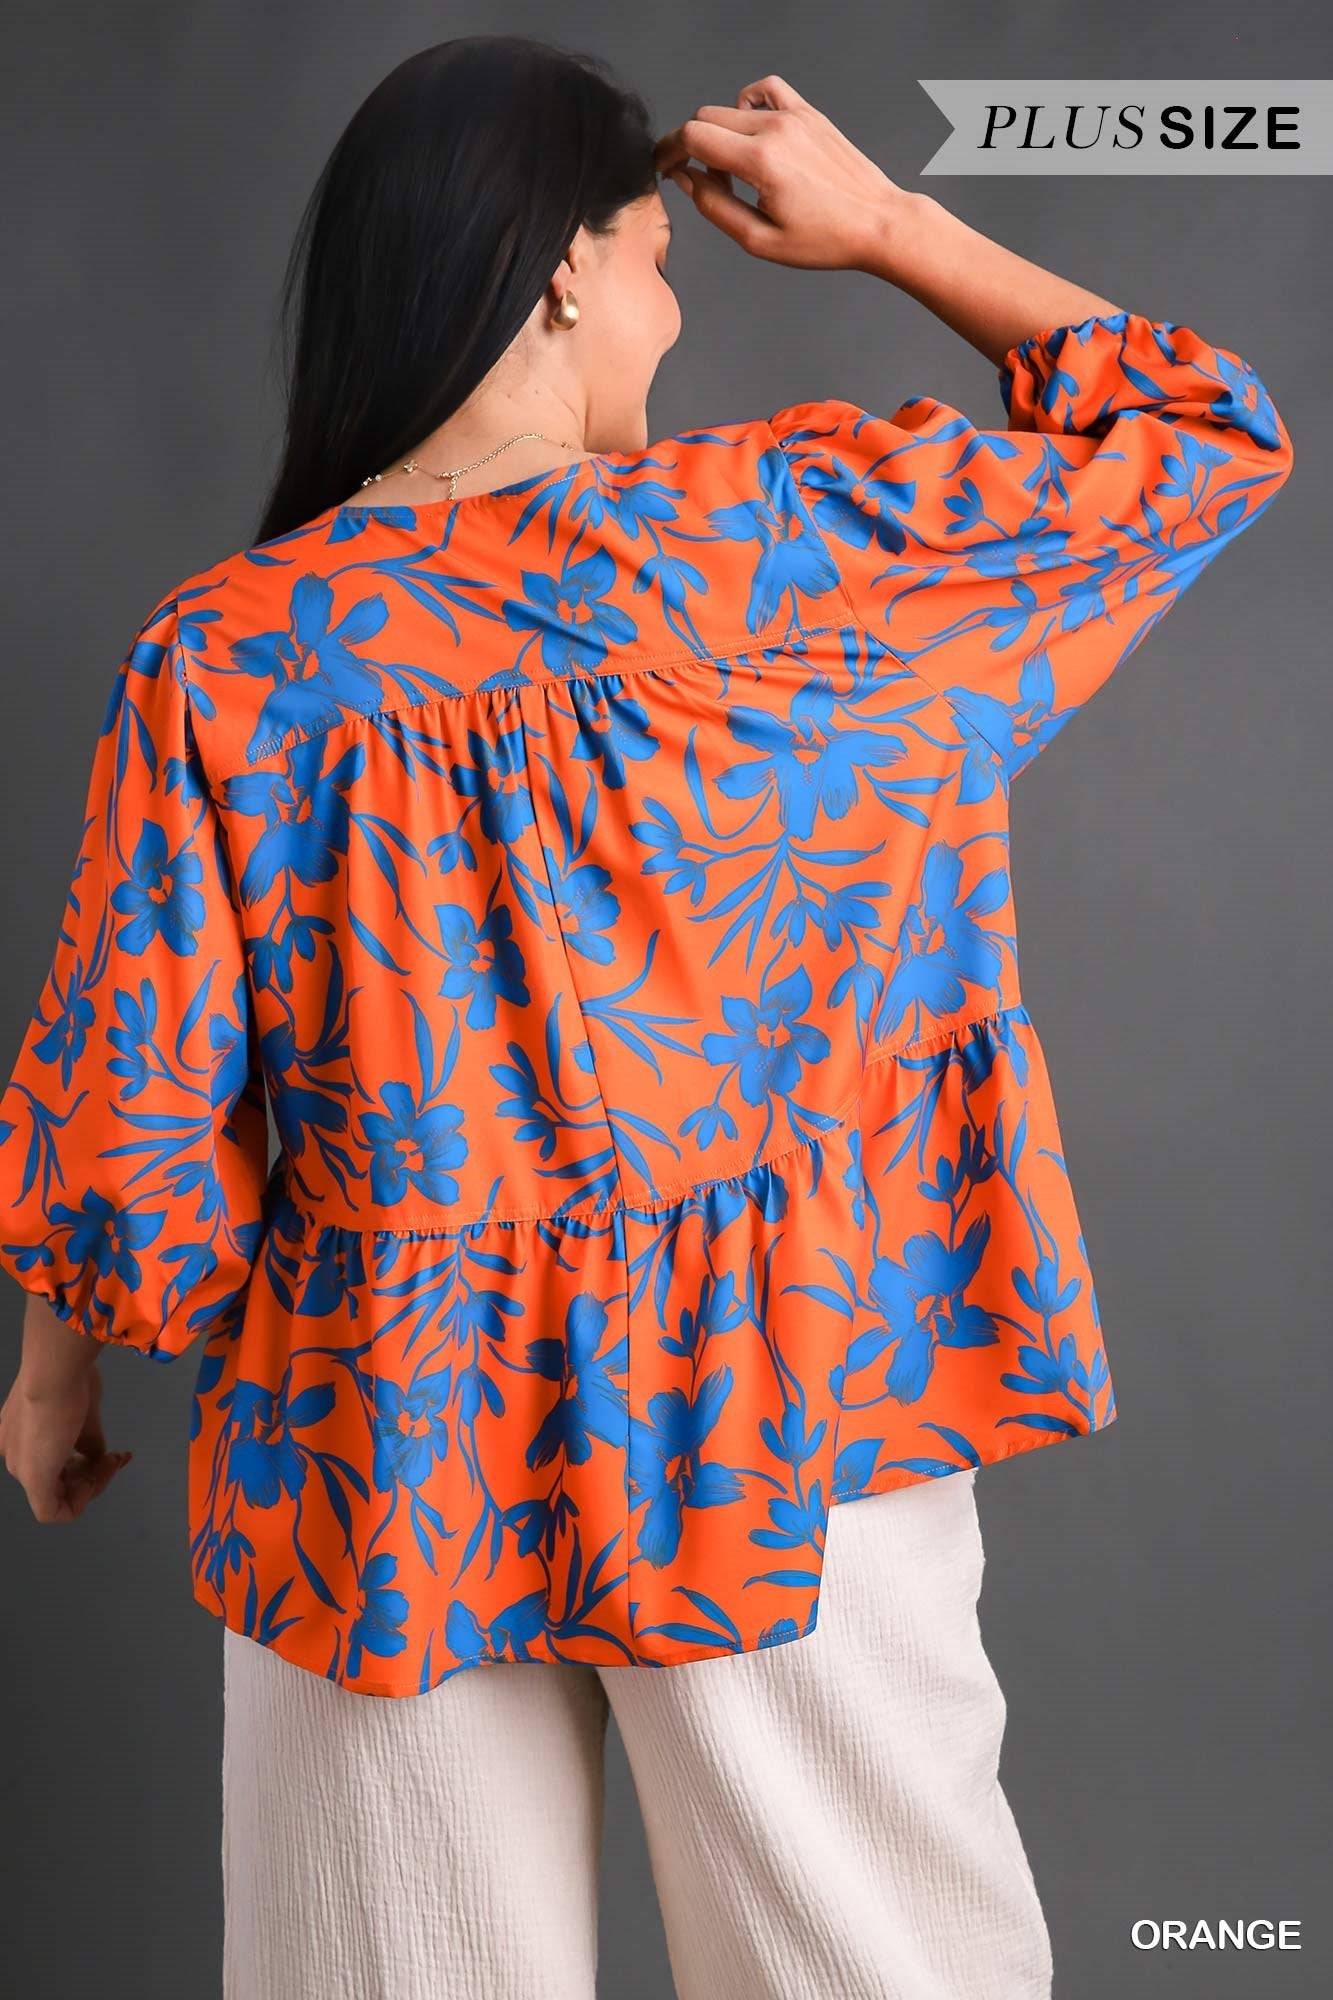 Vibrant Flowery Patterned 3/4 Top in Curvy